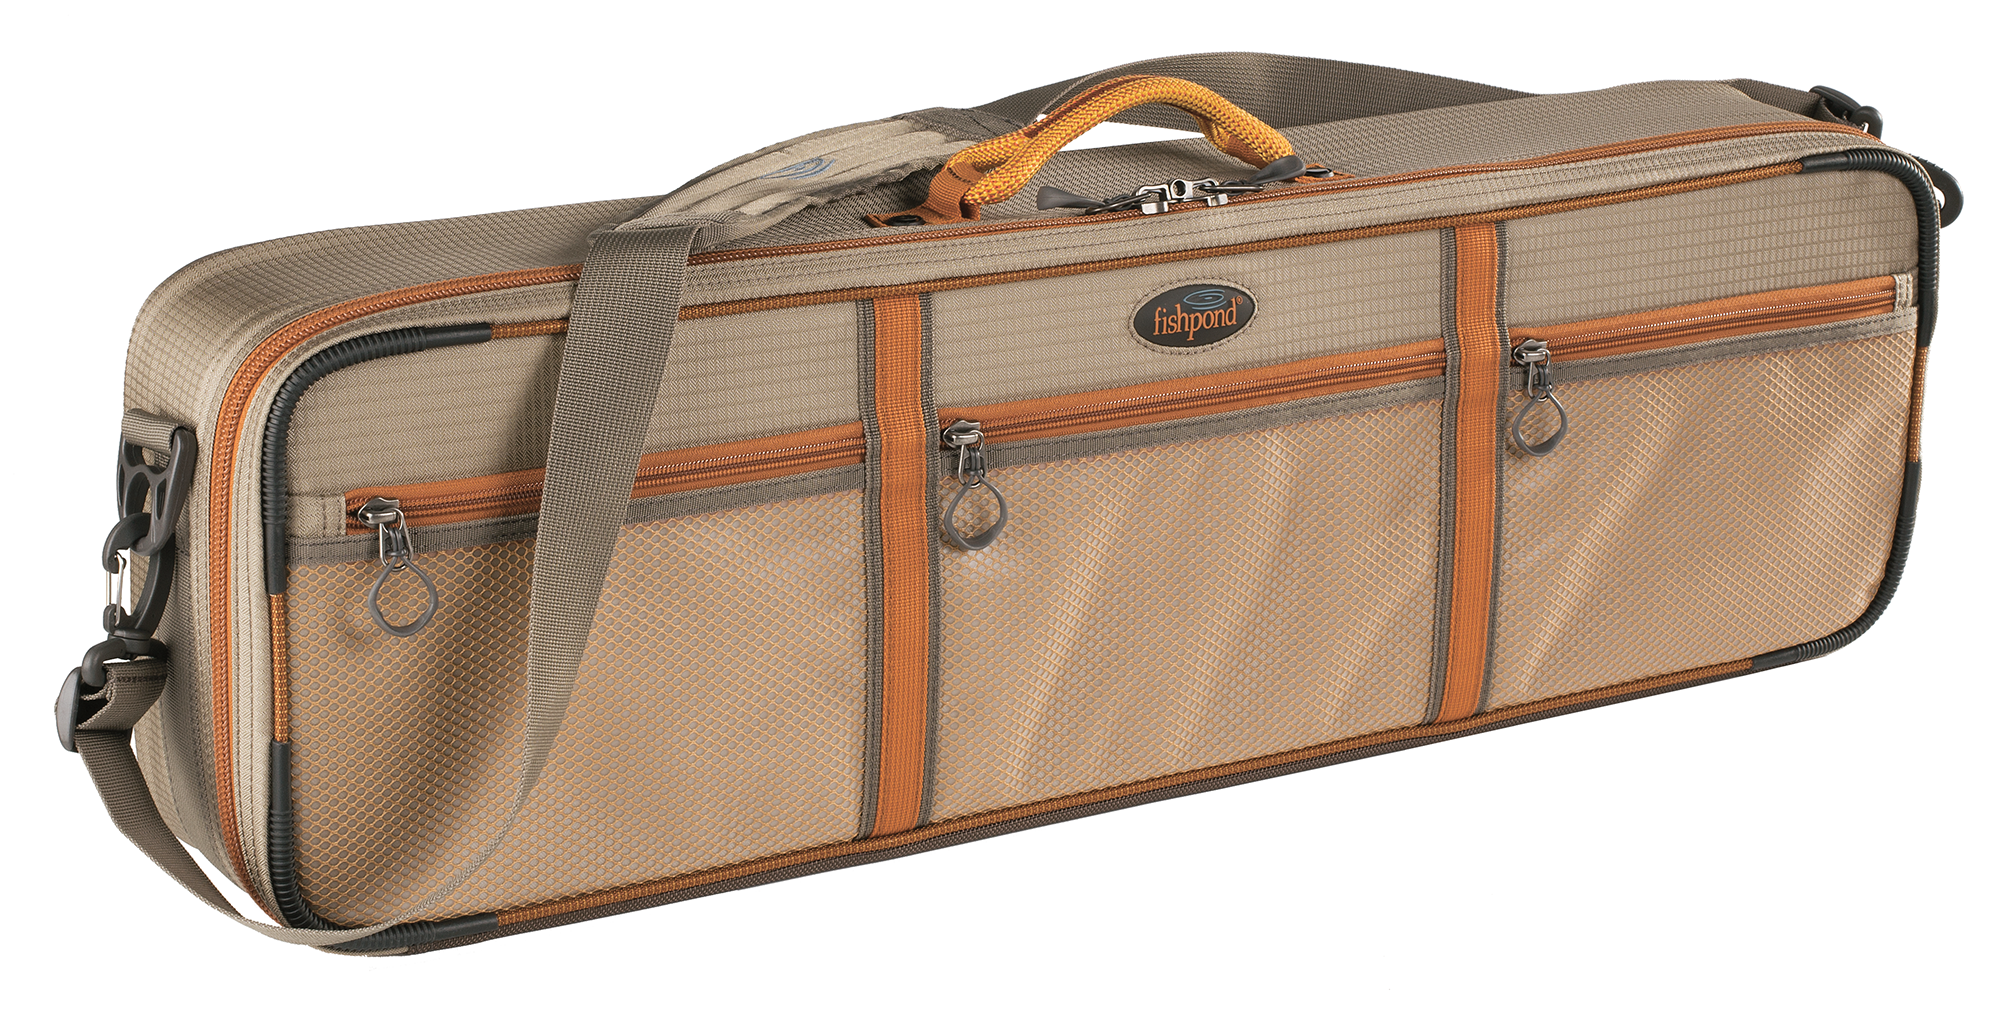 Orvis Rod and Reel Case - Single